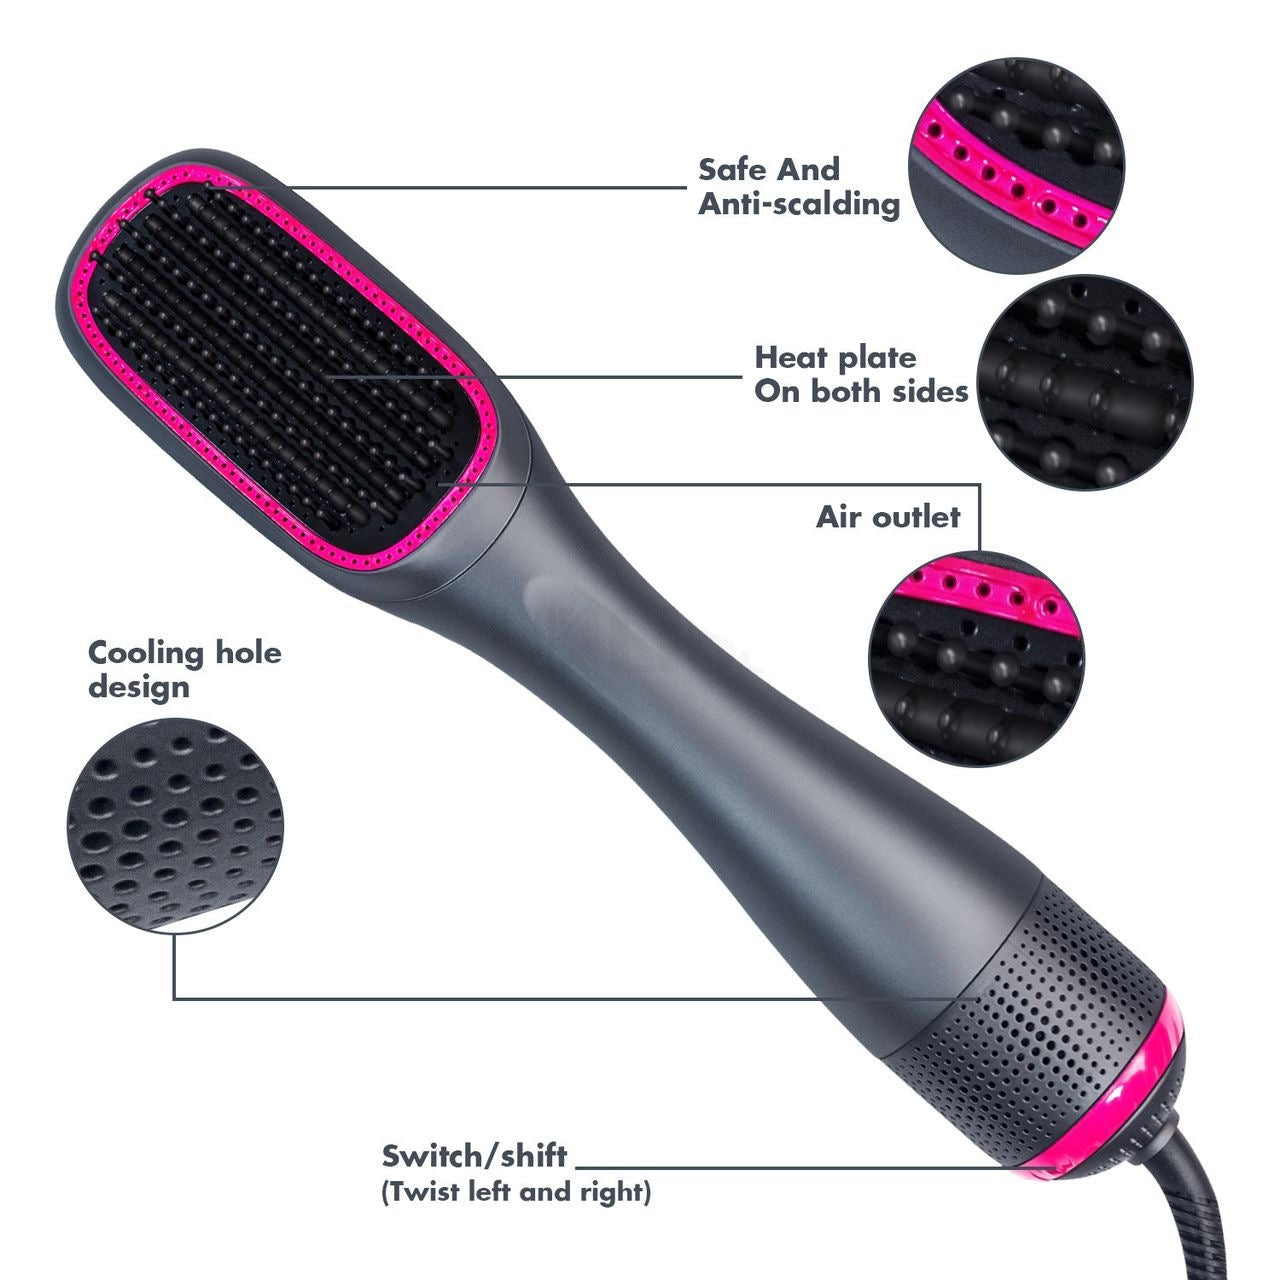 The Hair One Step Blow Dryer Brush